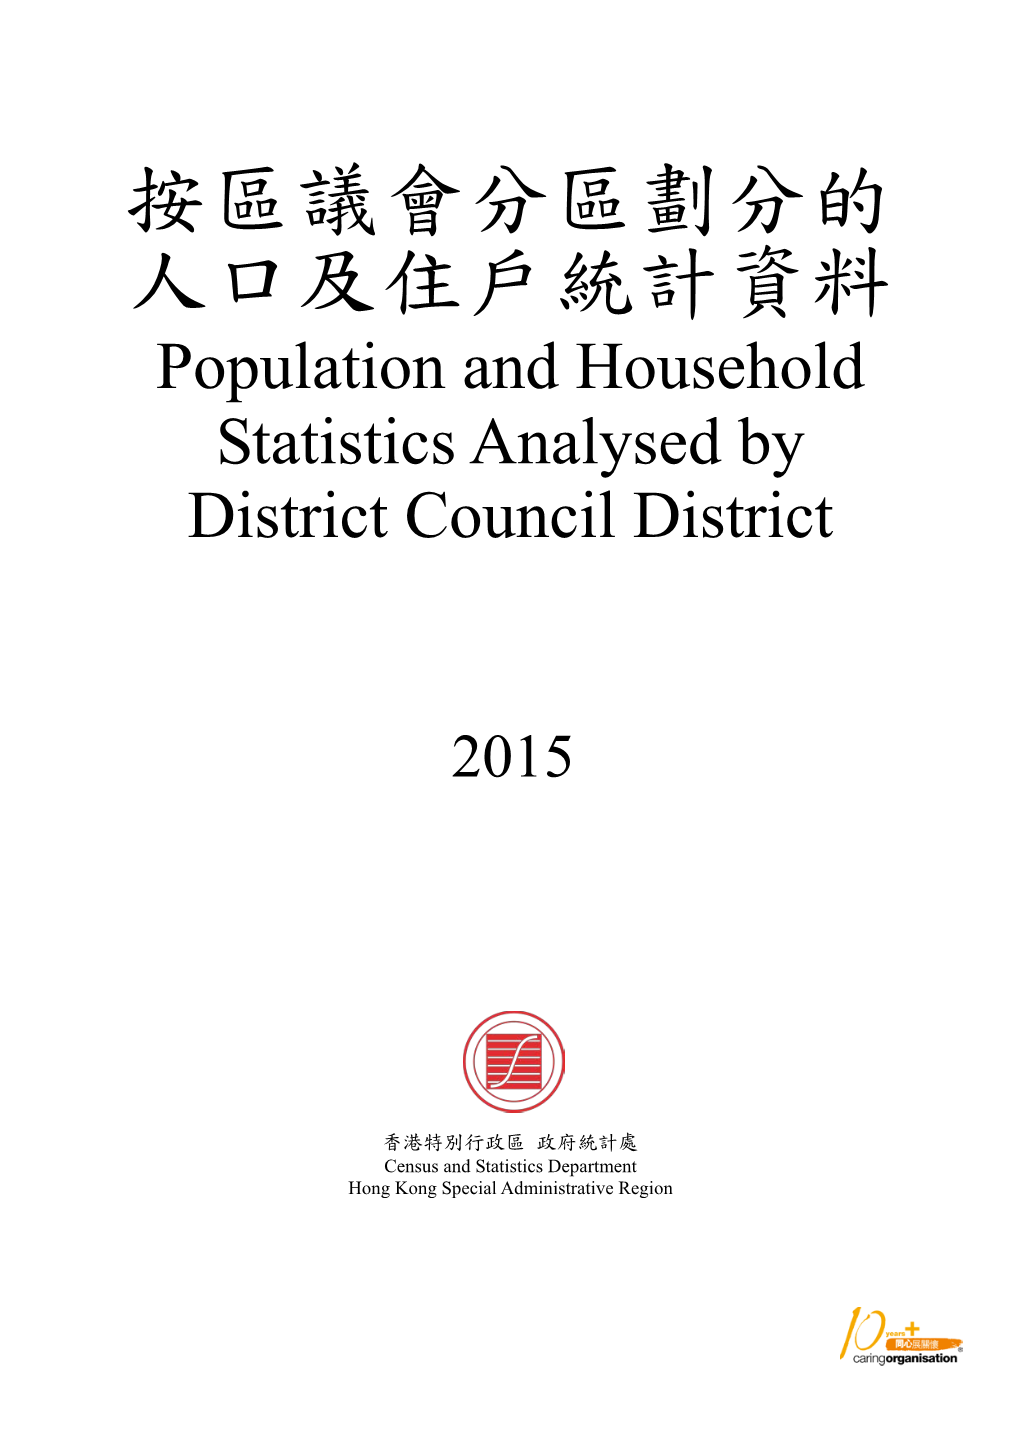 Population and Household Statistics Analysed by District Council District